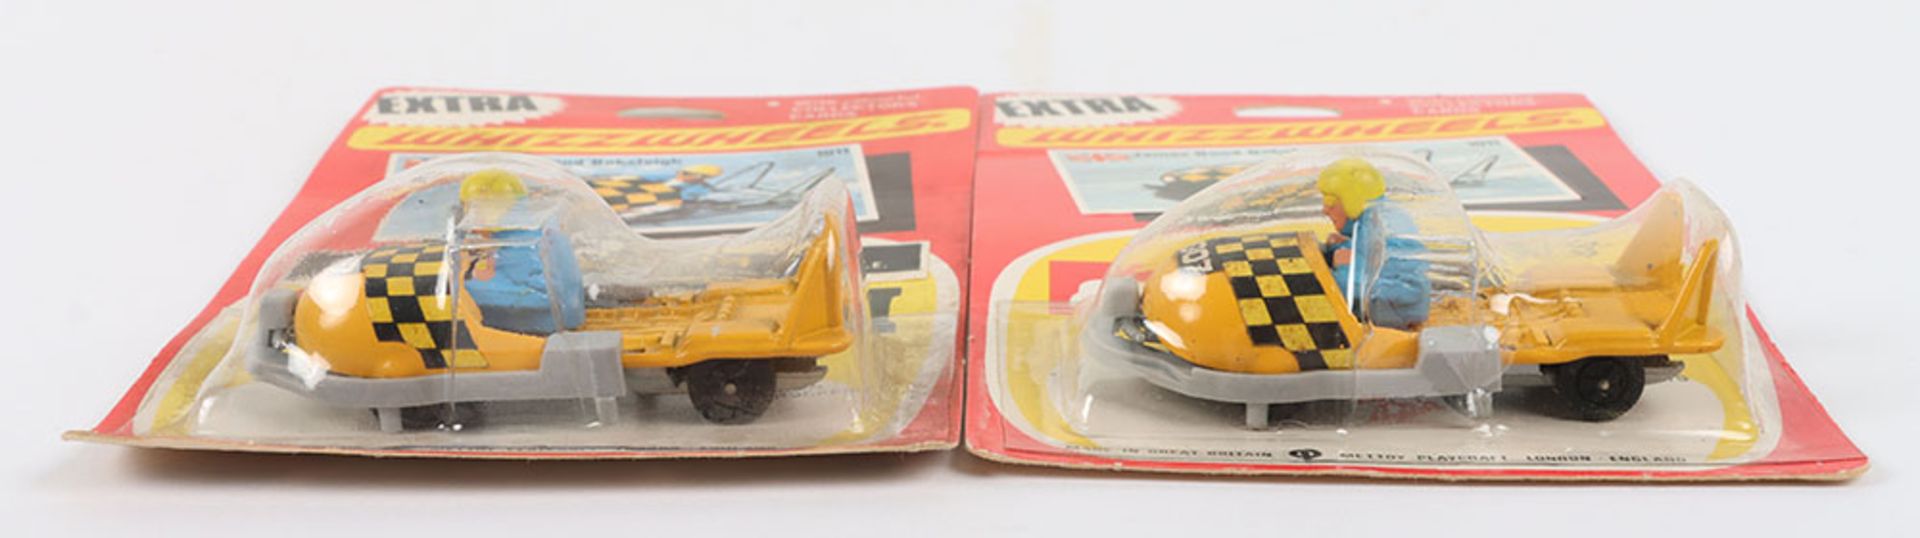 Two Scarce Extra Corgi Juniors 1011 Bobsleighs used by James Bond in his pursuit of the Chief of S.P - Bild 8 aus 10